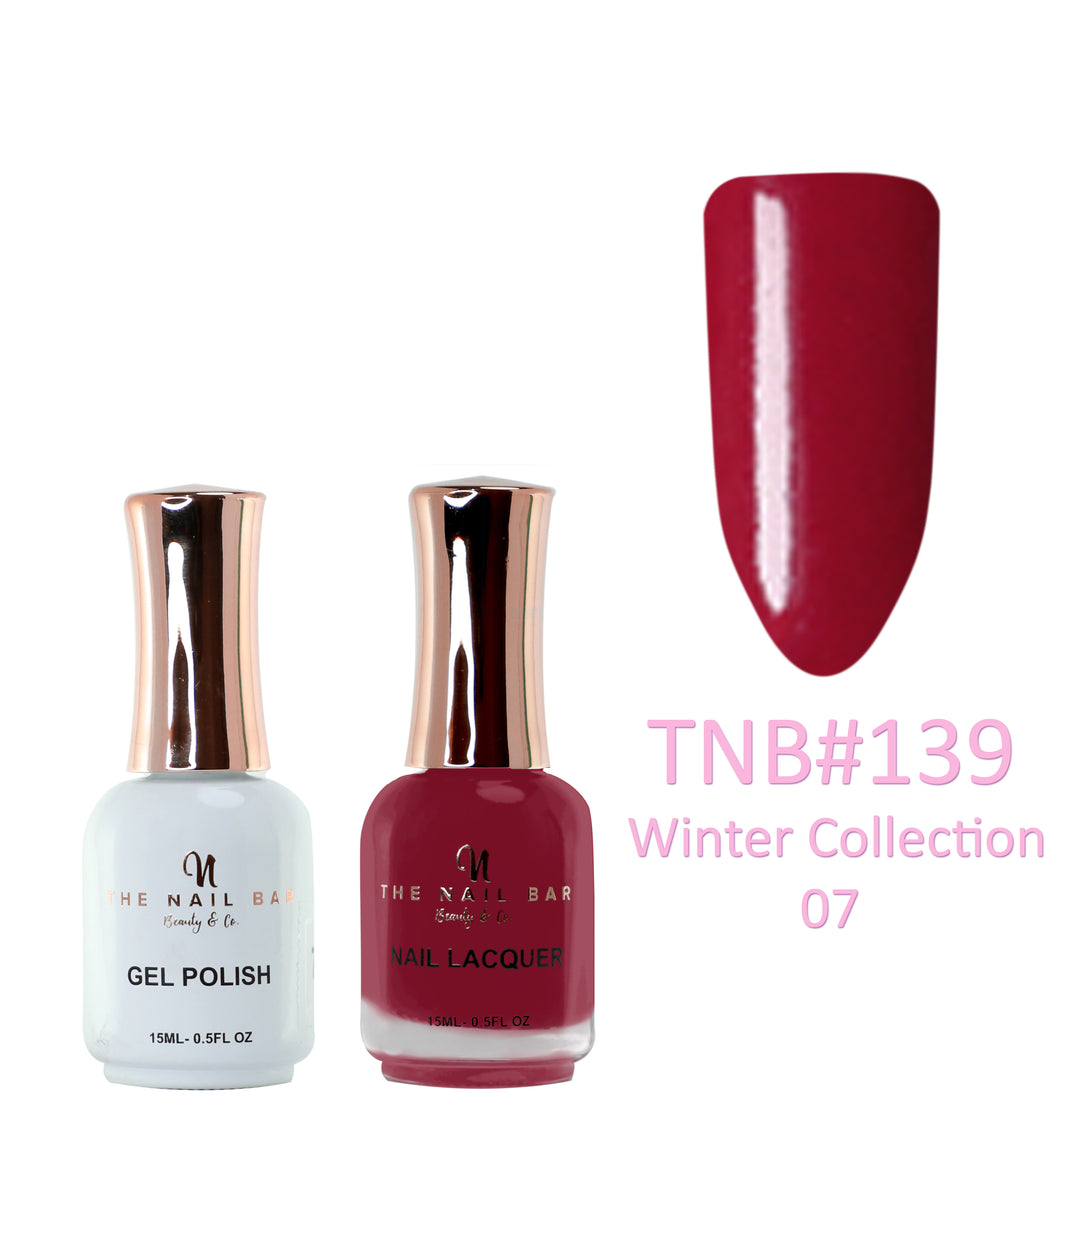 Dual Polish/Gel colour matching (15ml) - Winter collection 07